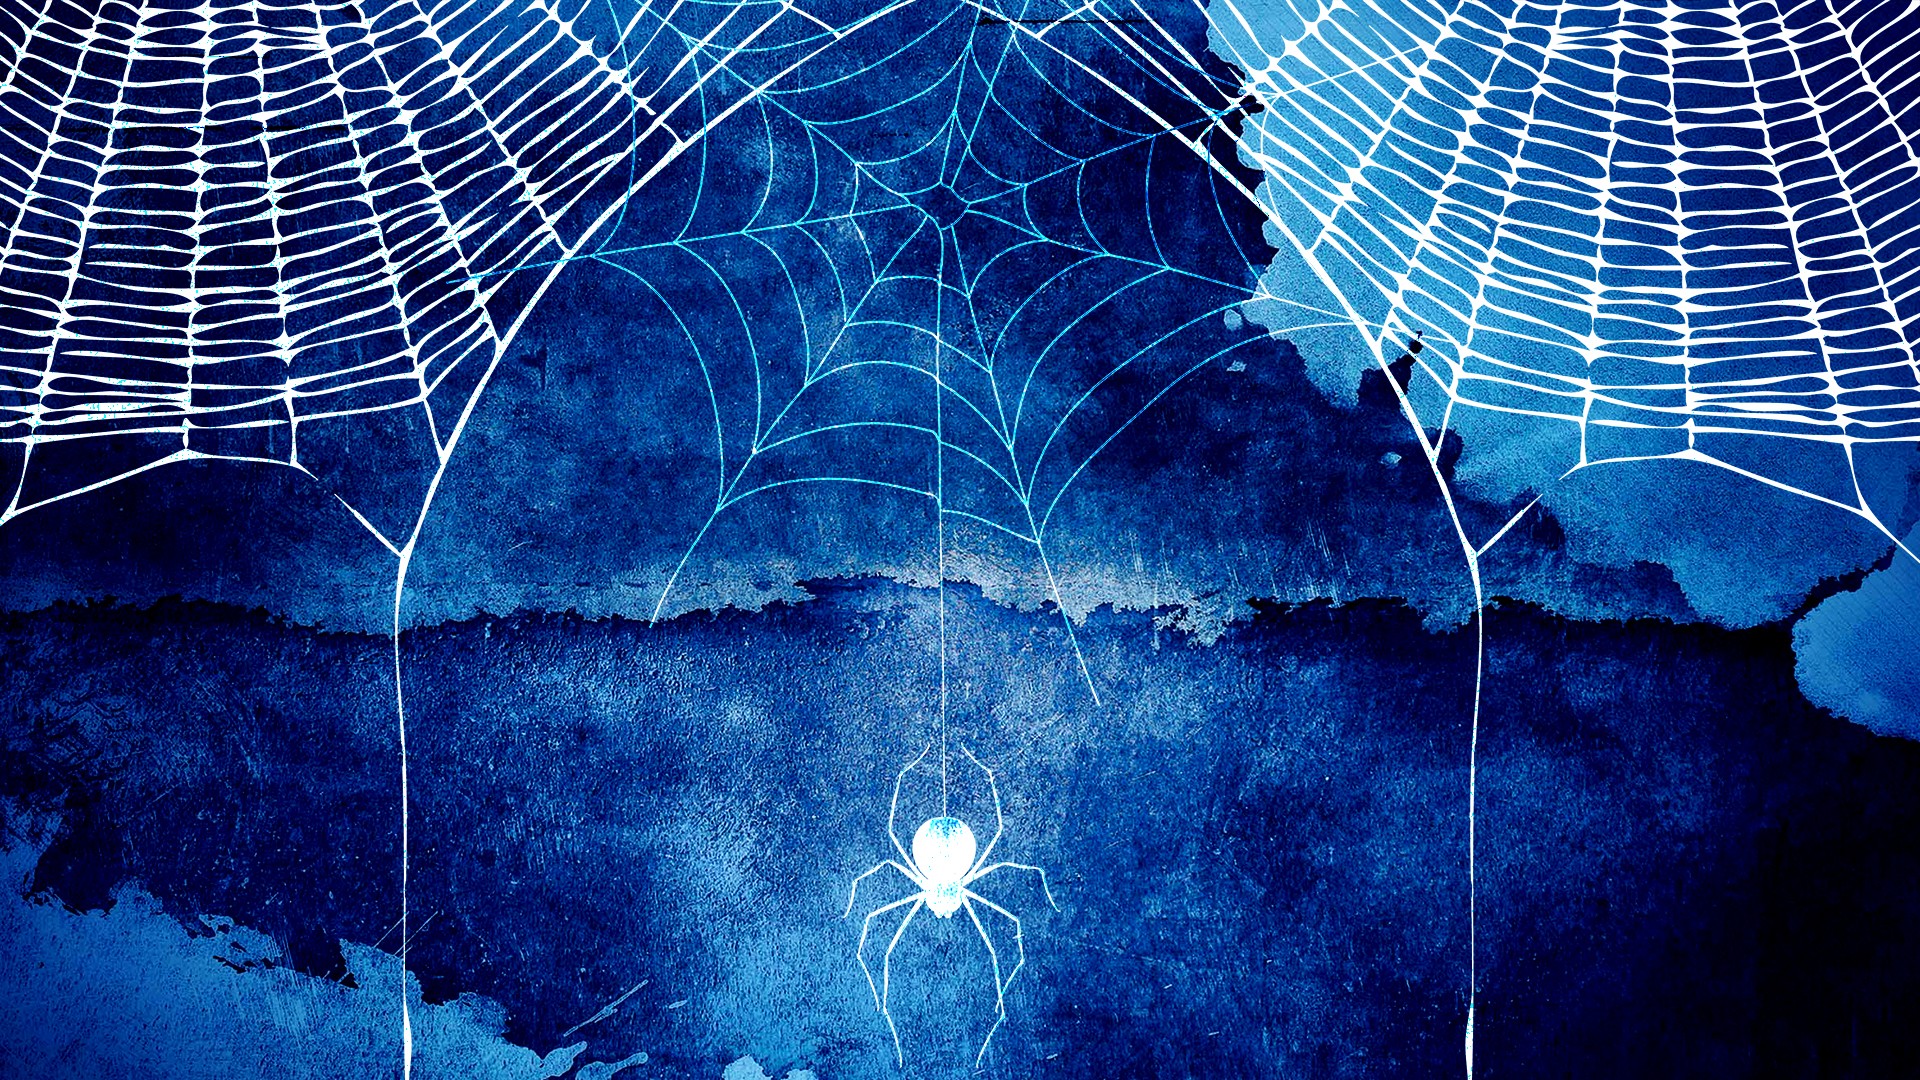 spider with a web wallpaper